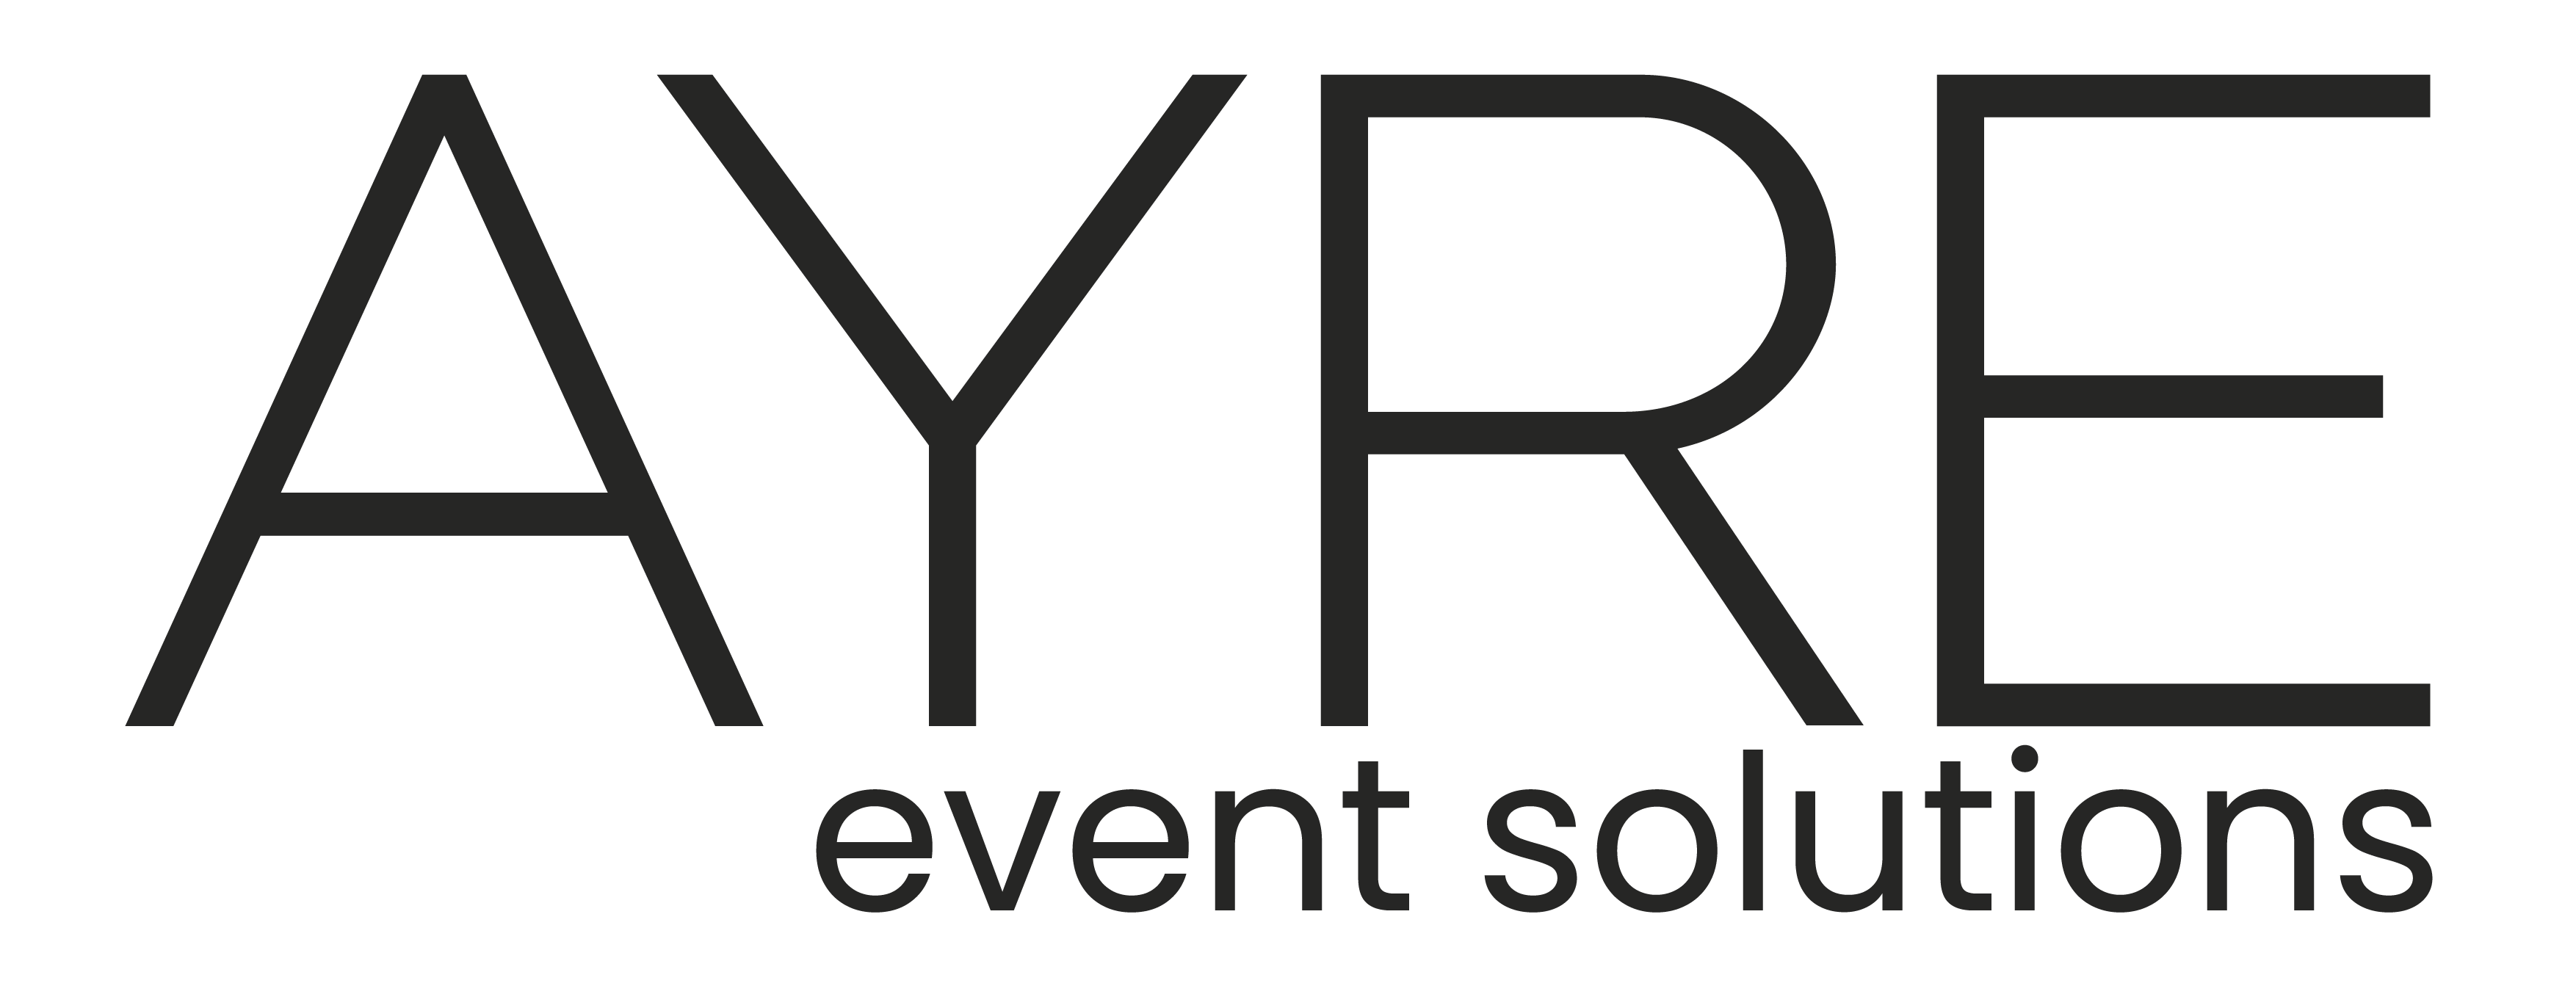 AYRE Event Solutions